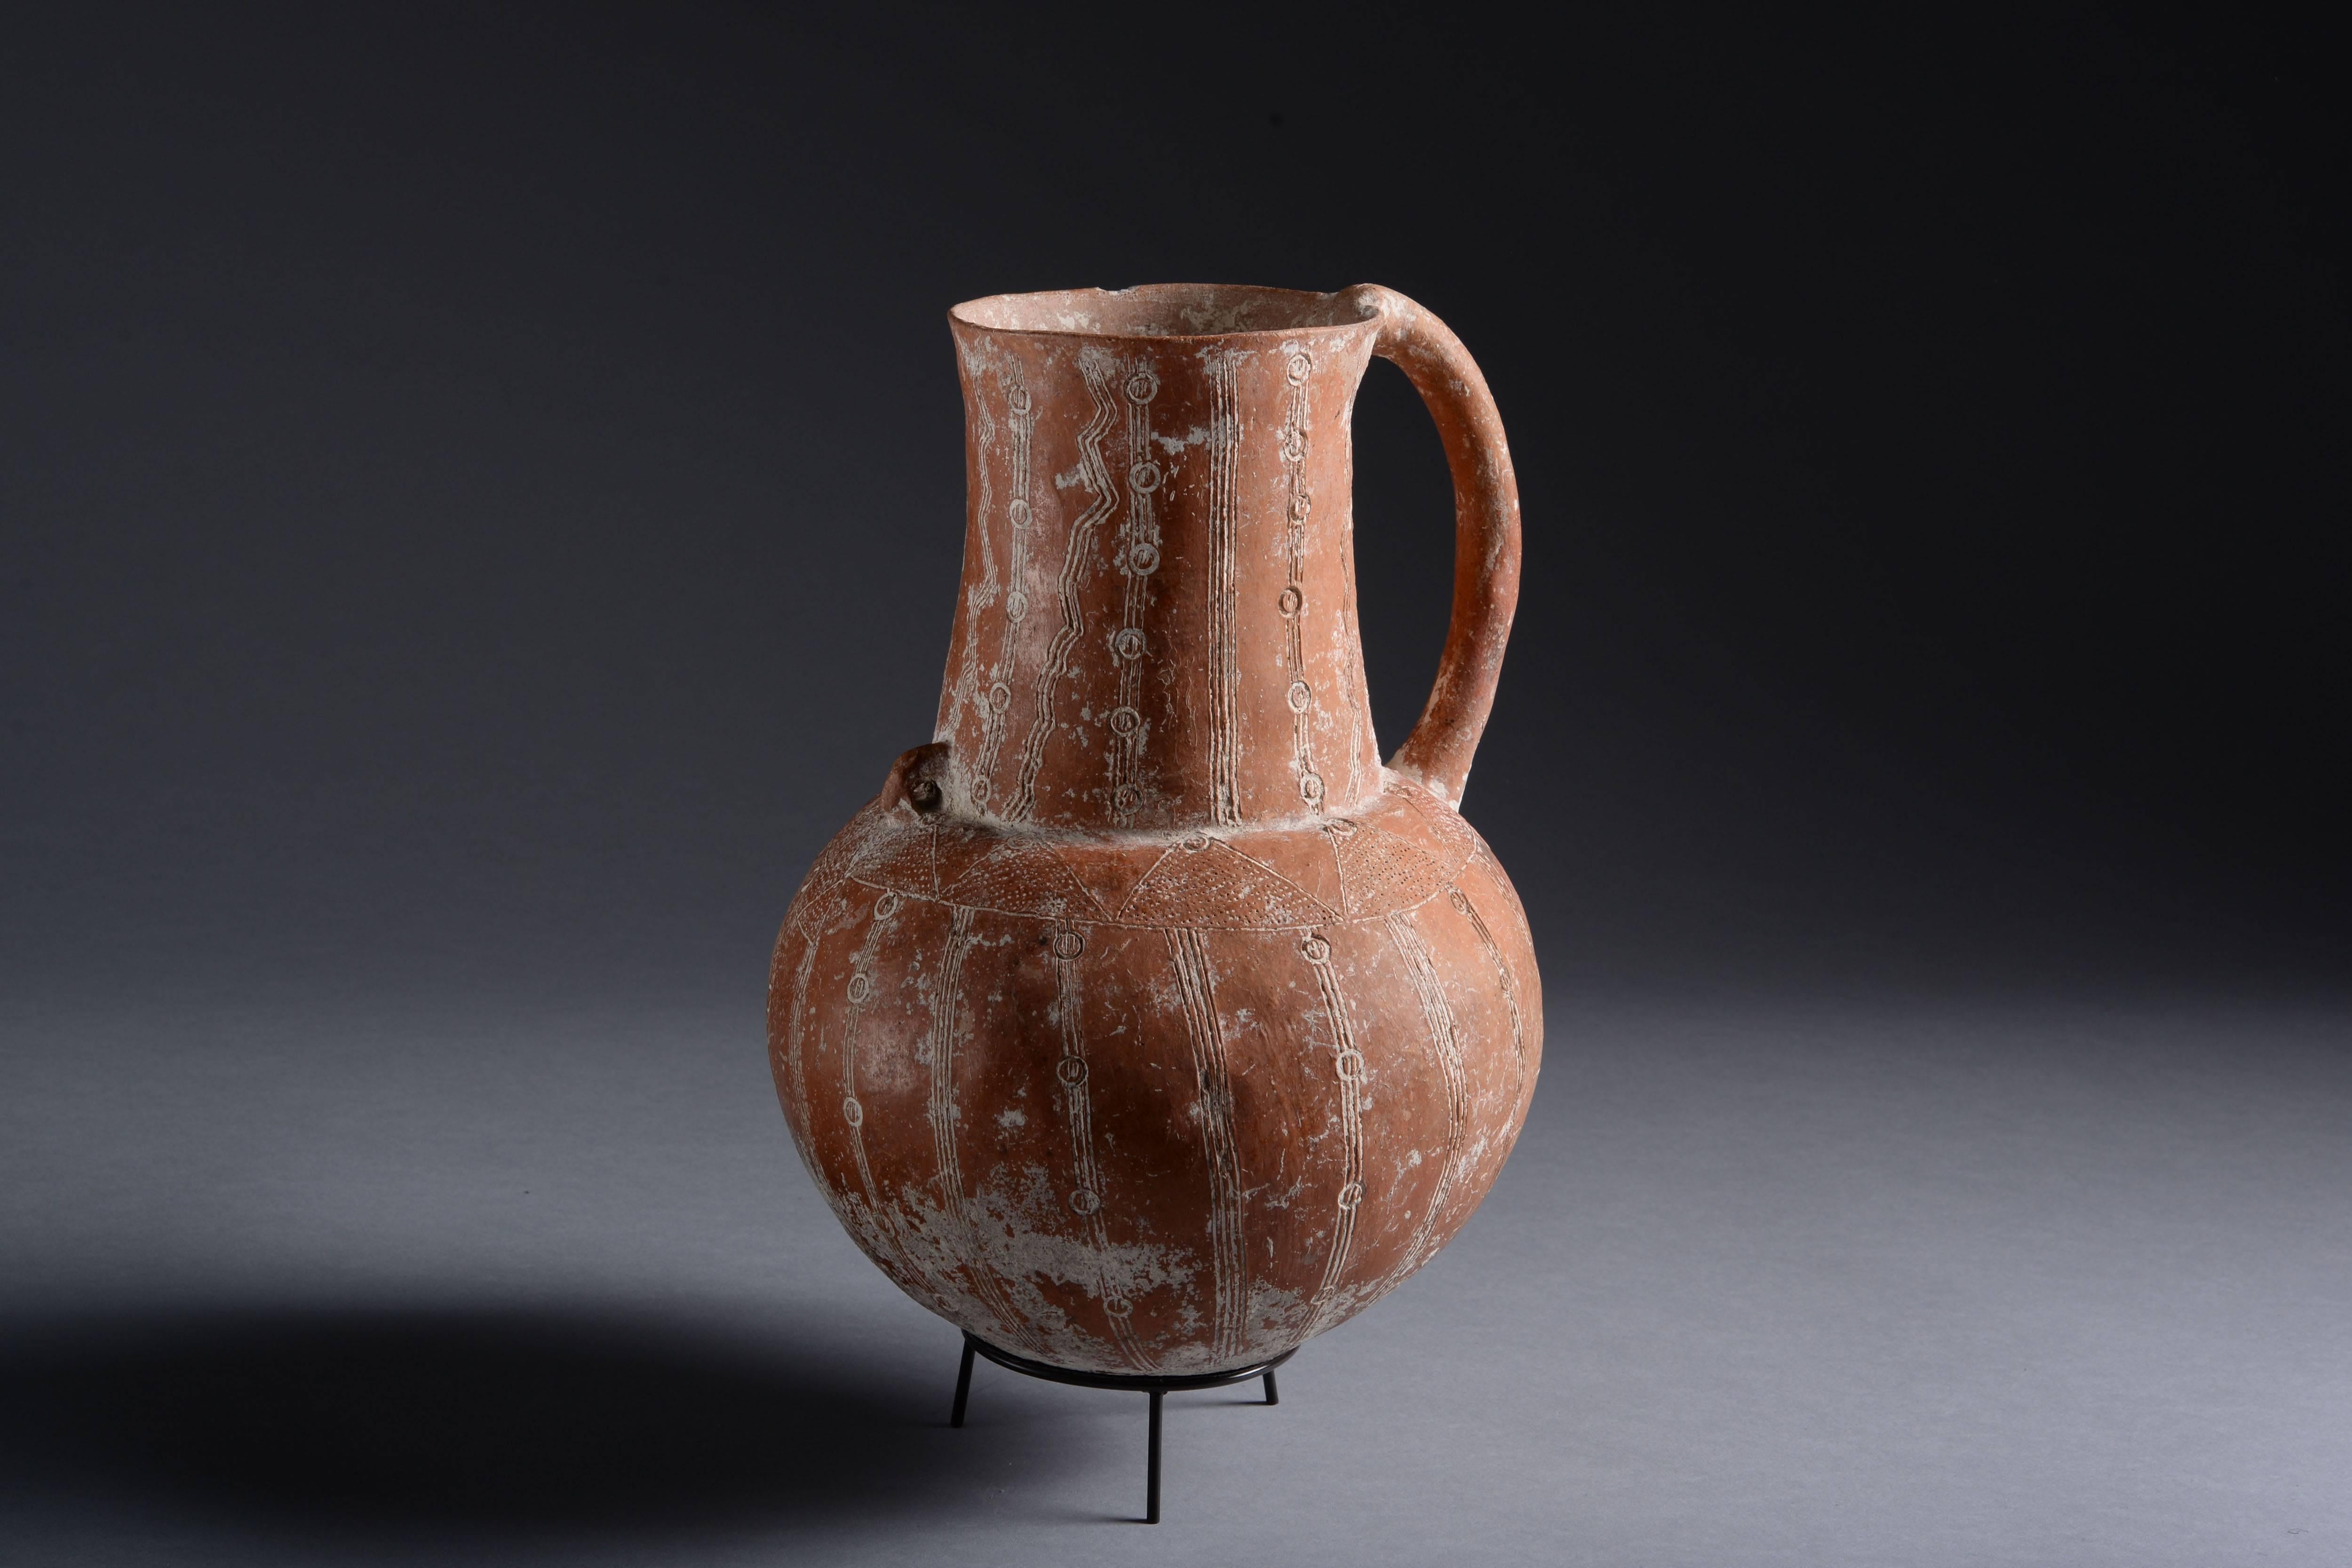 An early bronze age cypriot jug, dating to approximately 2400-1900 BC. Of typical red burnished pottery.

The globular body with wide cylindrical neck. Beautiful incised decorations throughout, lime filled and displaying a combination of zig-zags,